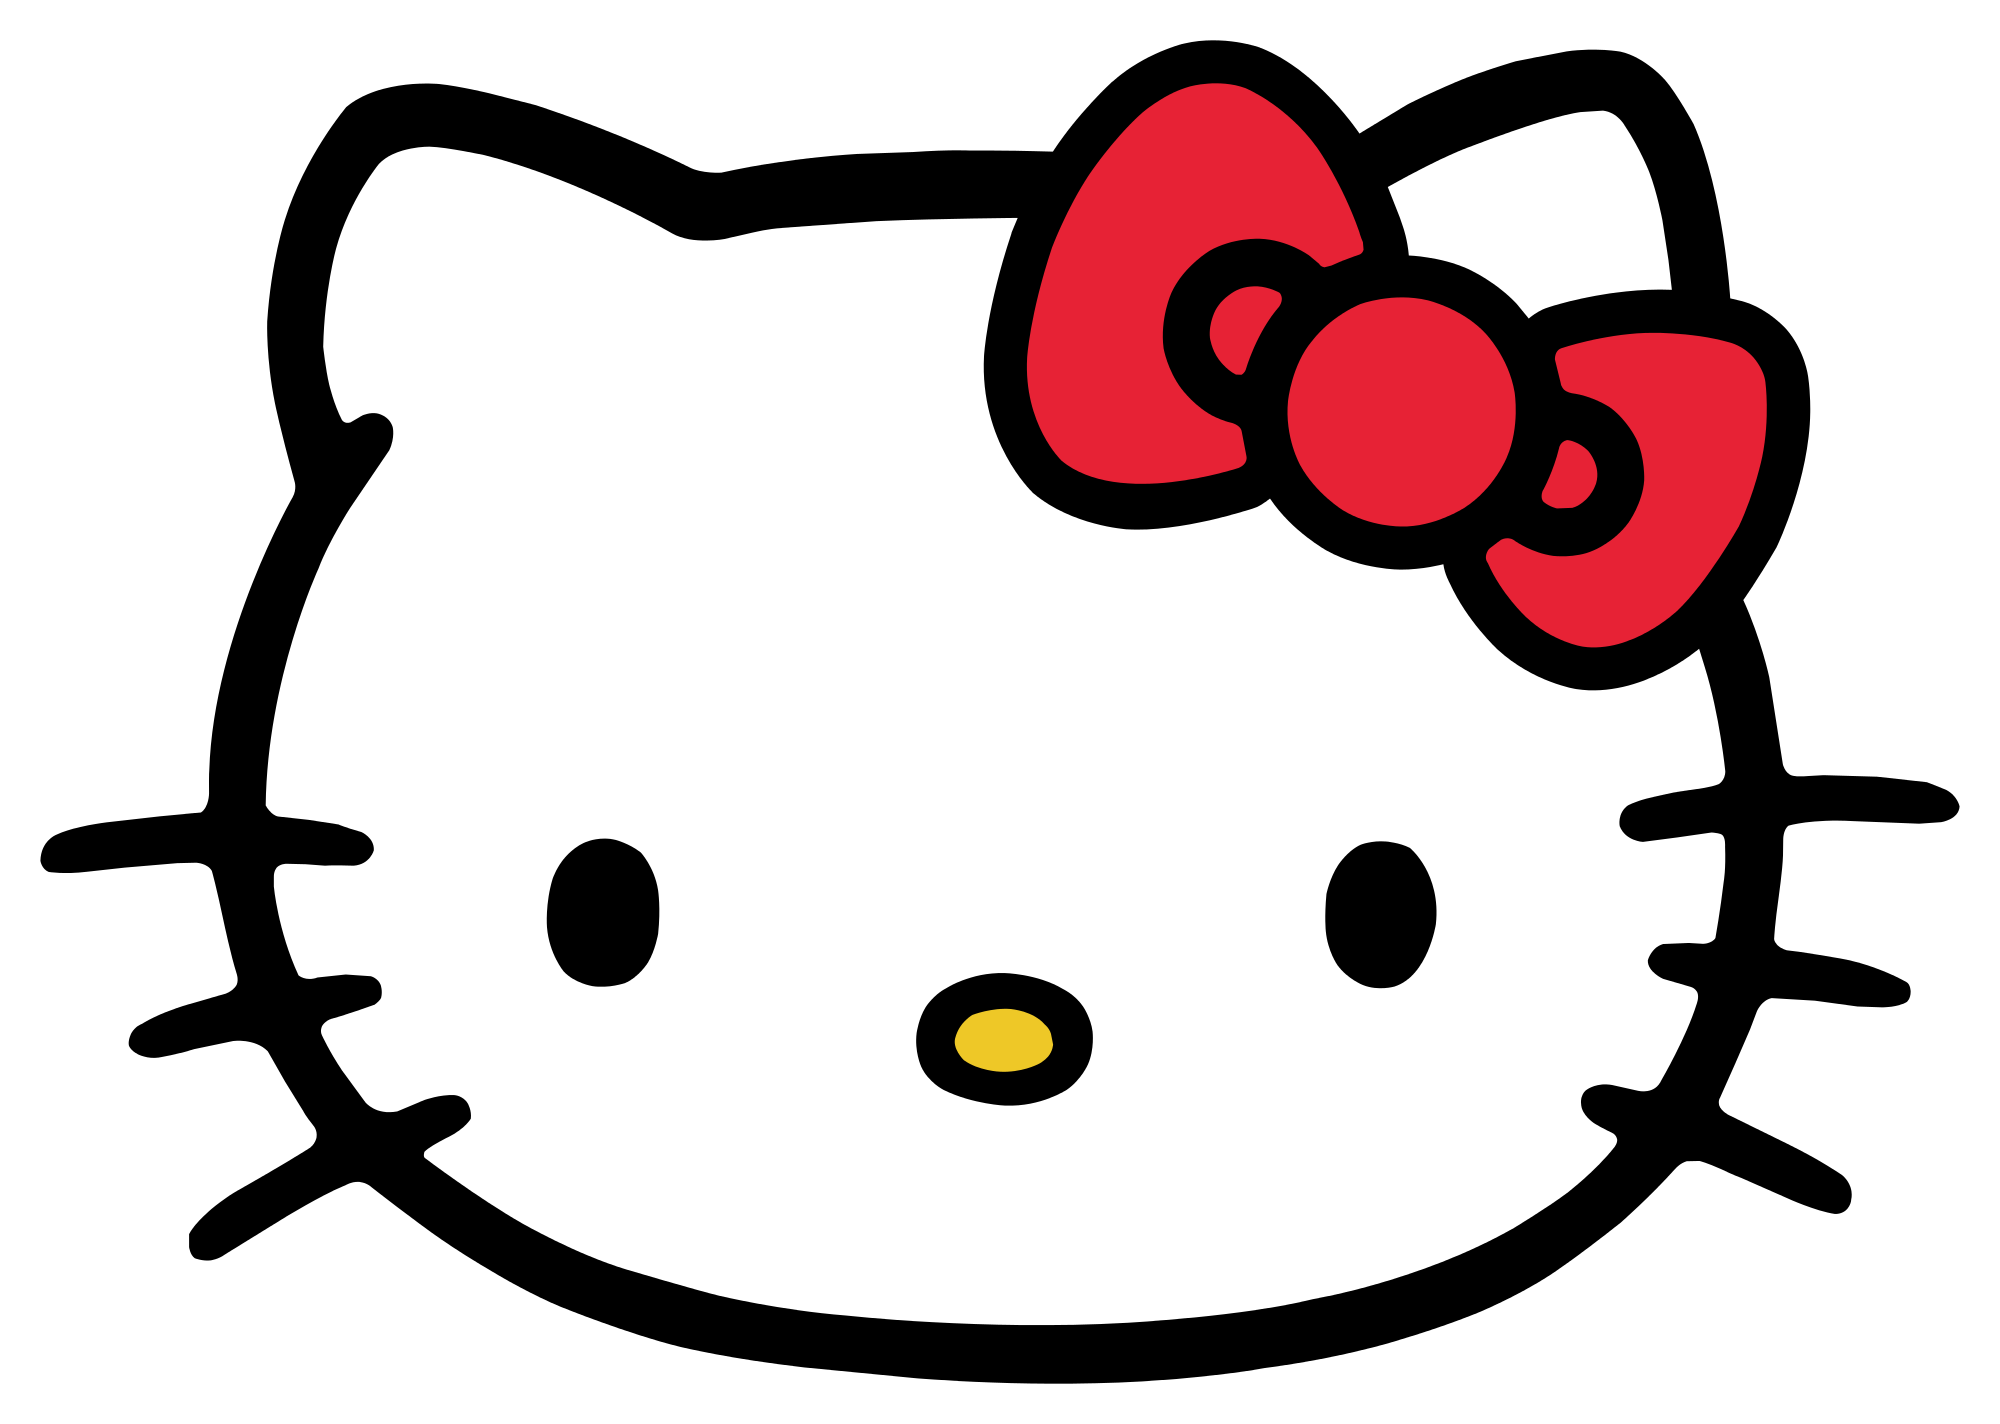 clipart free downloads hello kitty